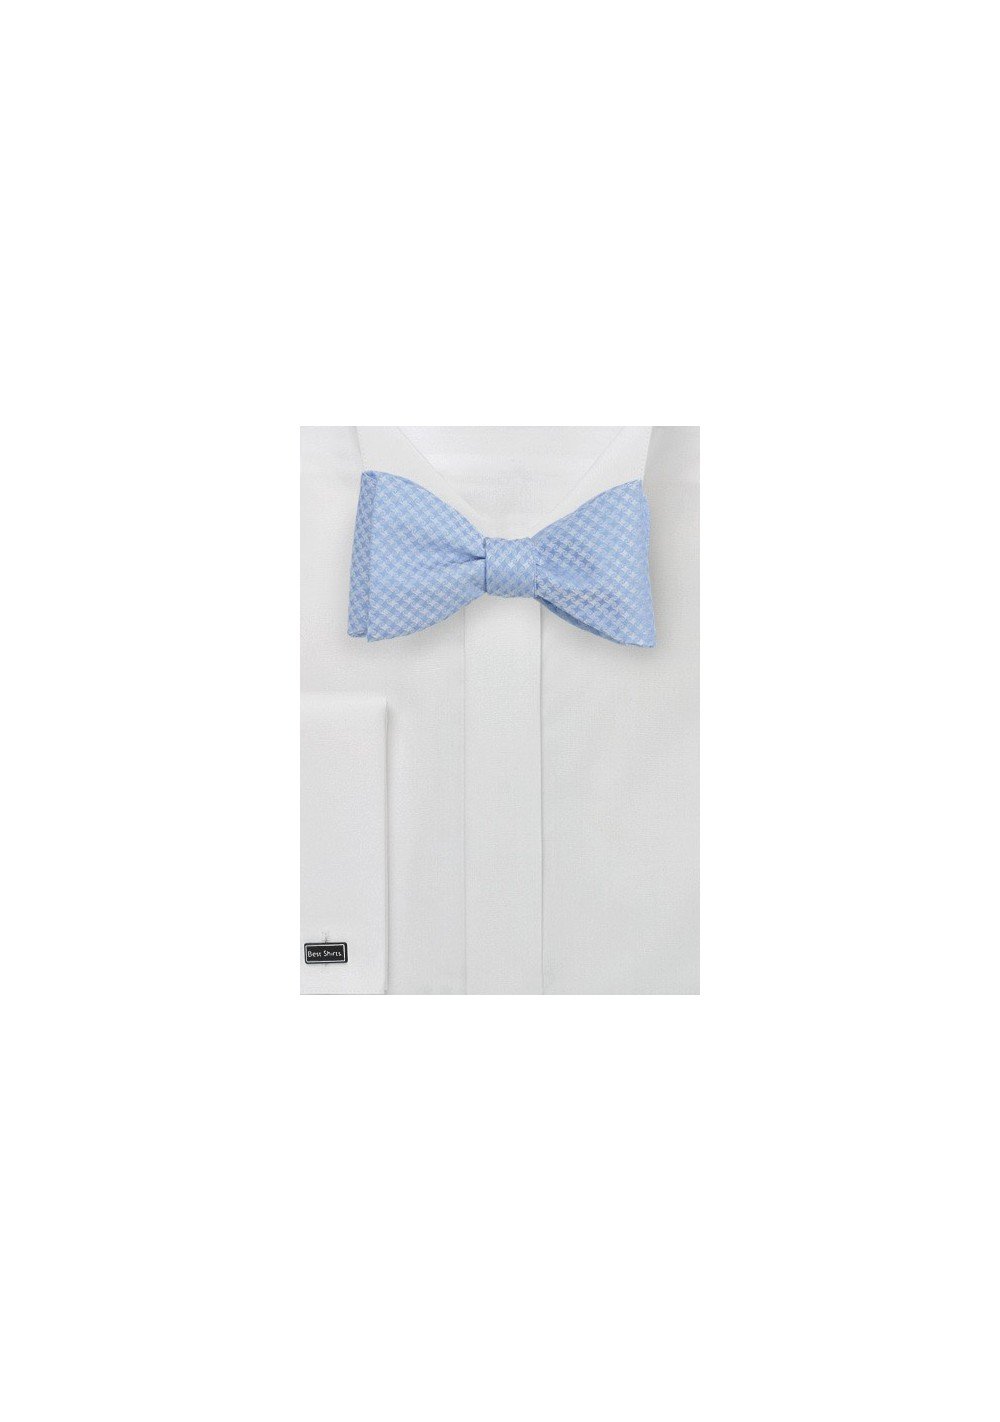 Soft Blue Bow Tie in Self Tie Style